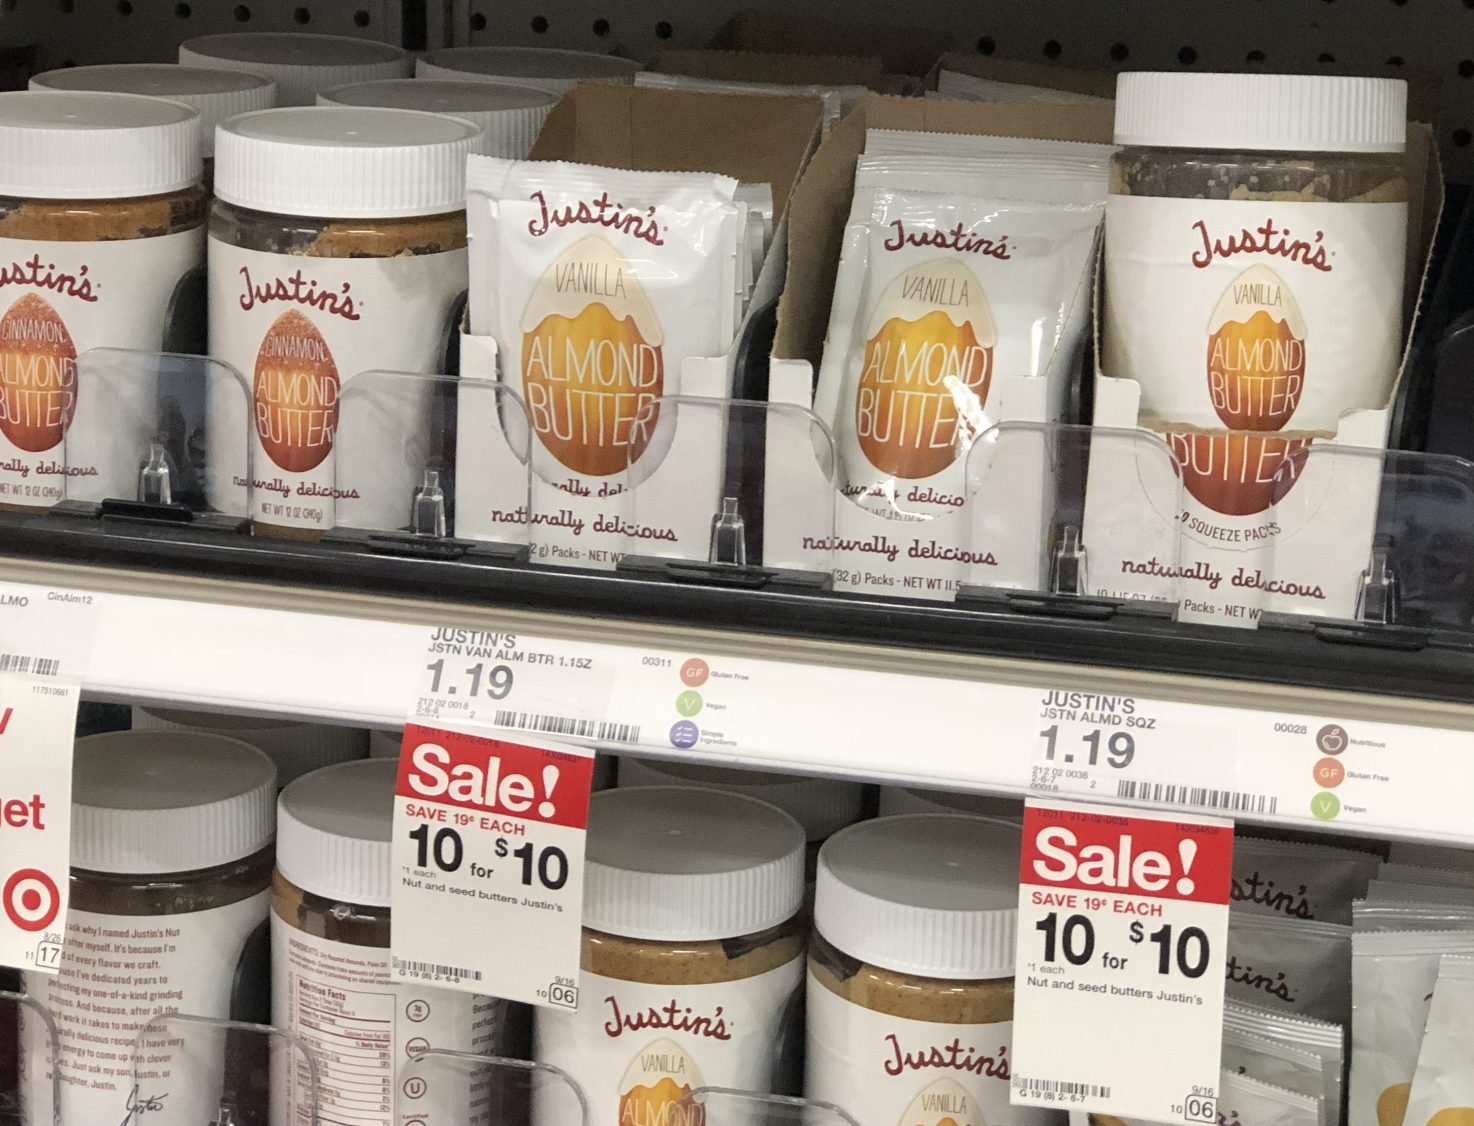 This keto target deal is for these justin's almond butter squeeze packs on a shelf next to jars of nut butter